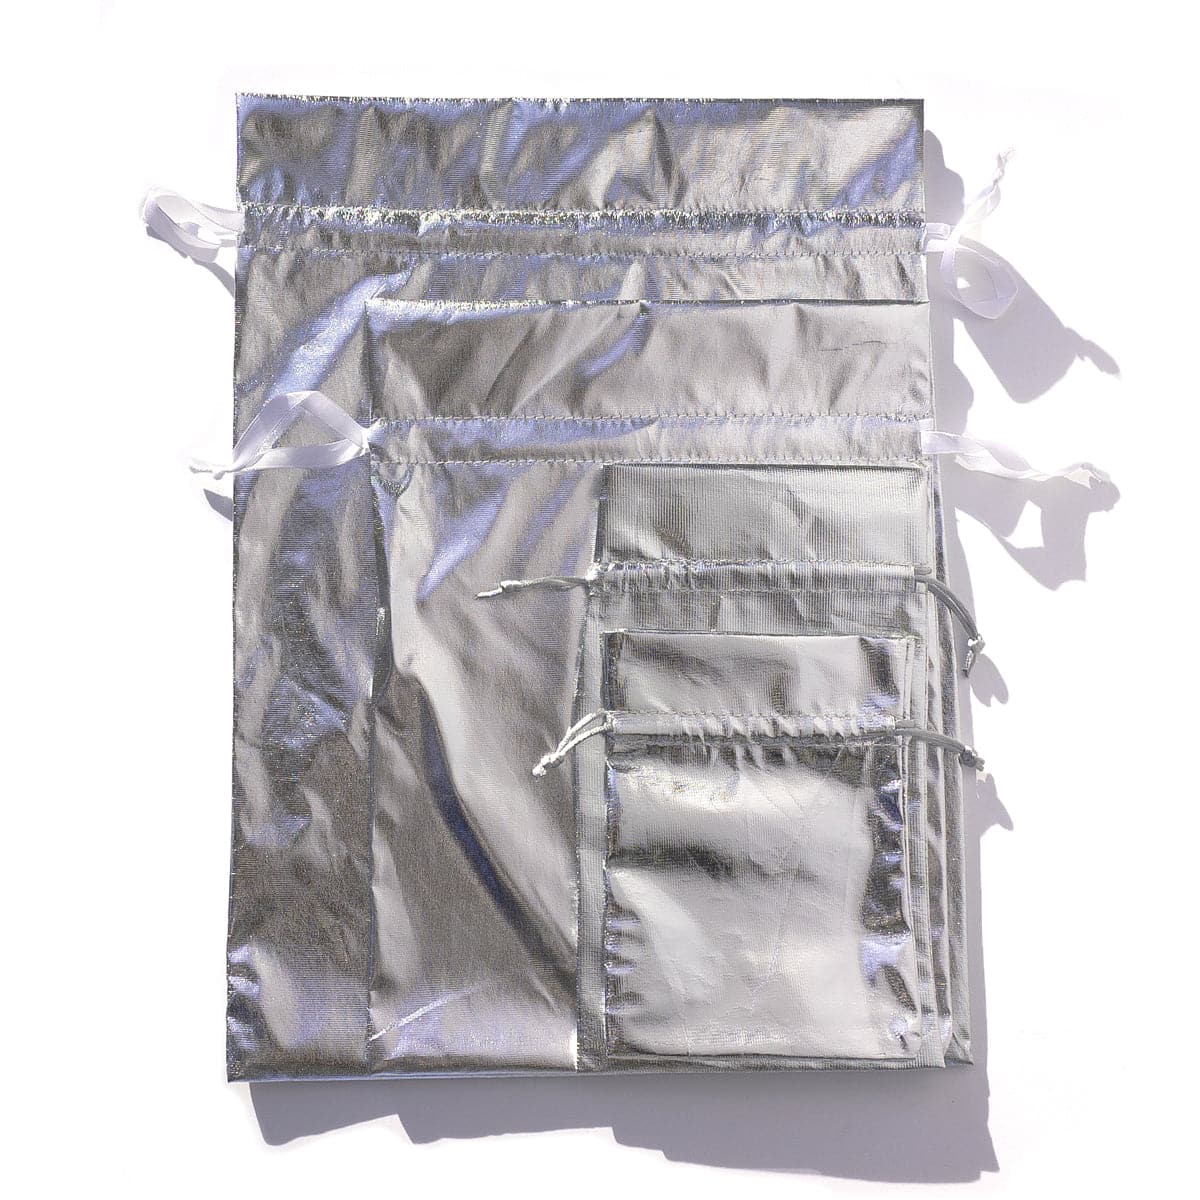 an image of 4 metallic silver drawstring gift bags on a white background, laying flat.